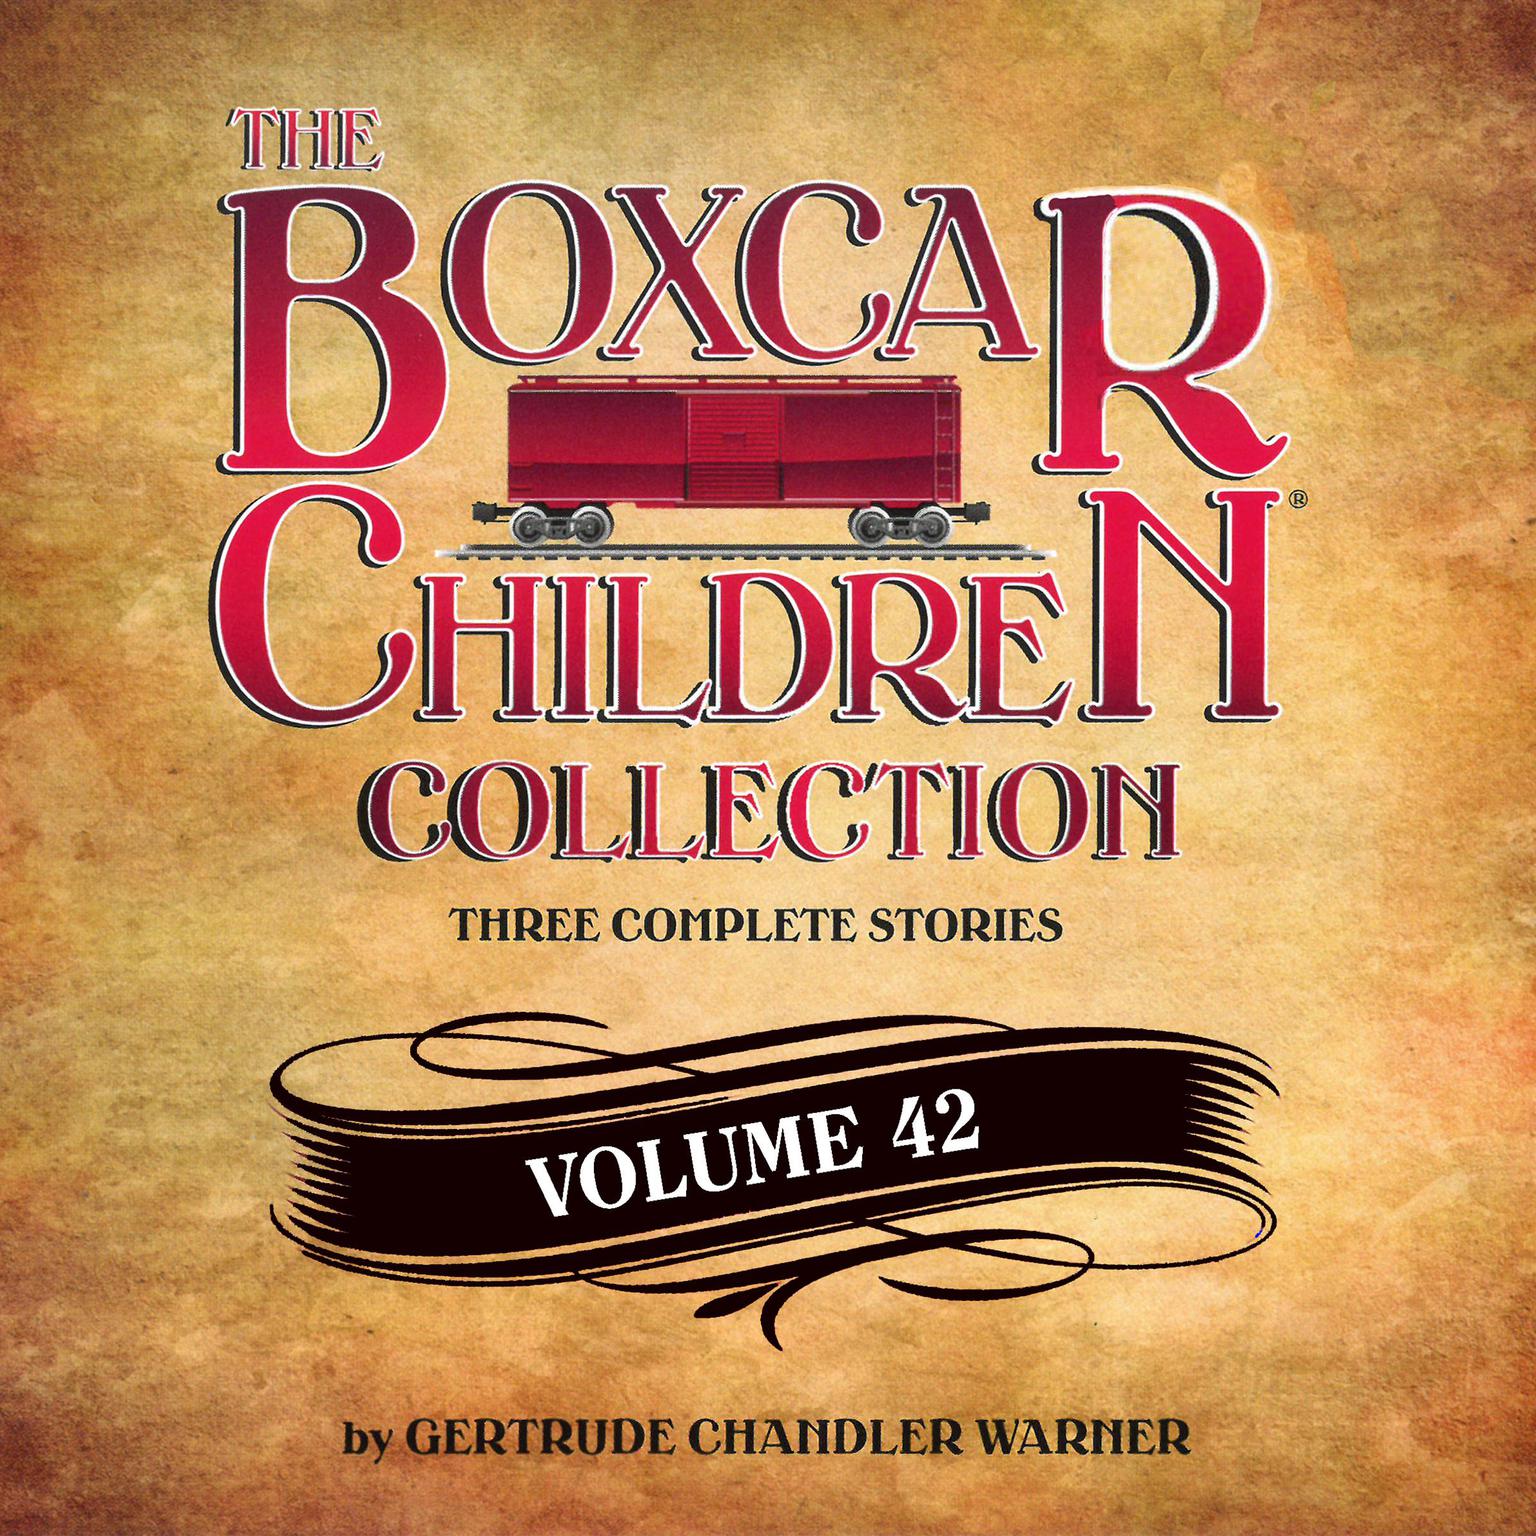 The Boxcar Children Collection Volume 42: The Pumpkin Head Mystery, The Cupcake Caper, The Clue in the Recycling Bin Audiobook, by Gertrude Chandler Warner